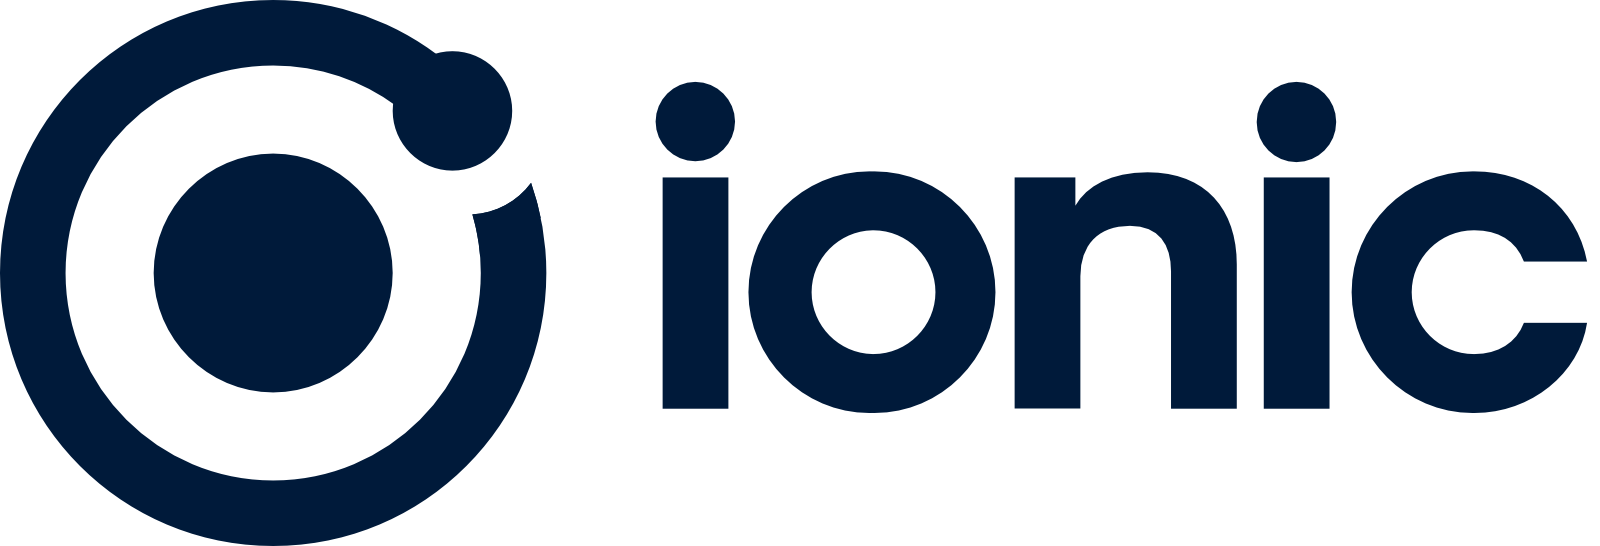 <p>Sign up for the Ionic newsletter to be entered in a sweepstakes to win swag and other prizes</p>
